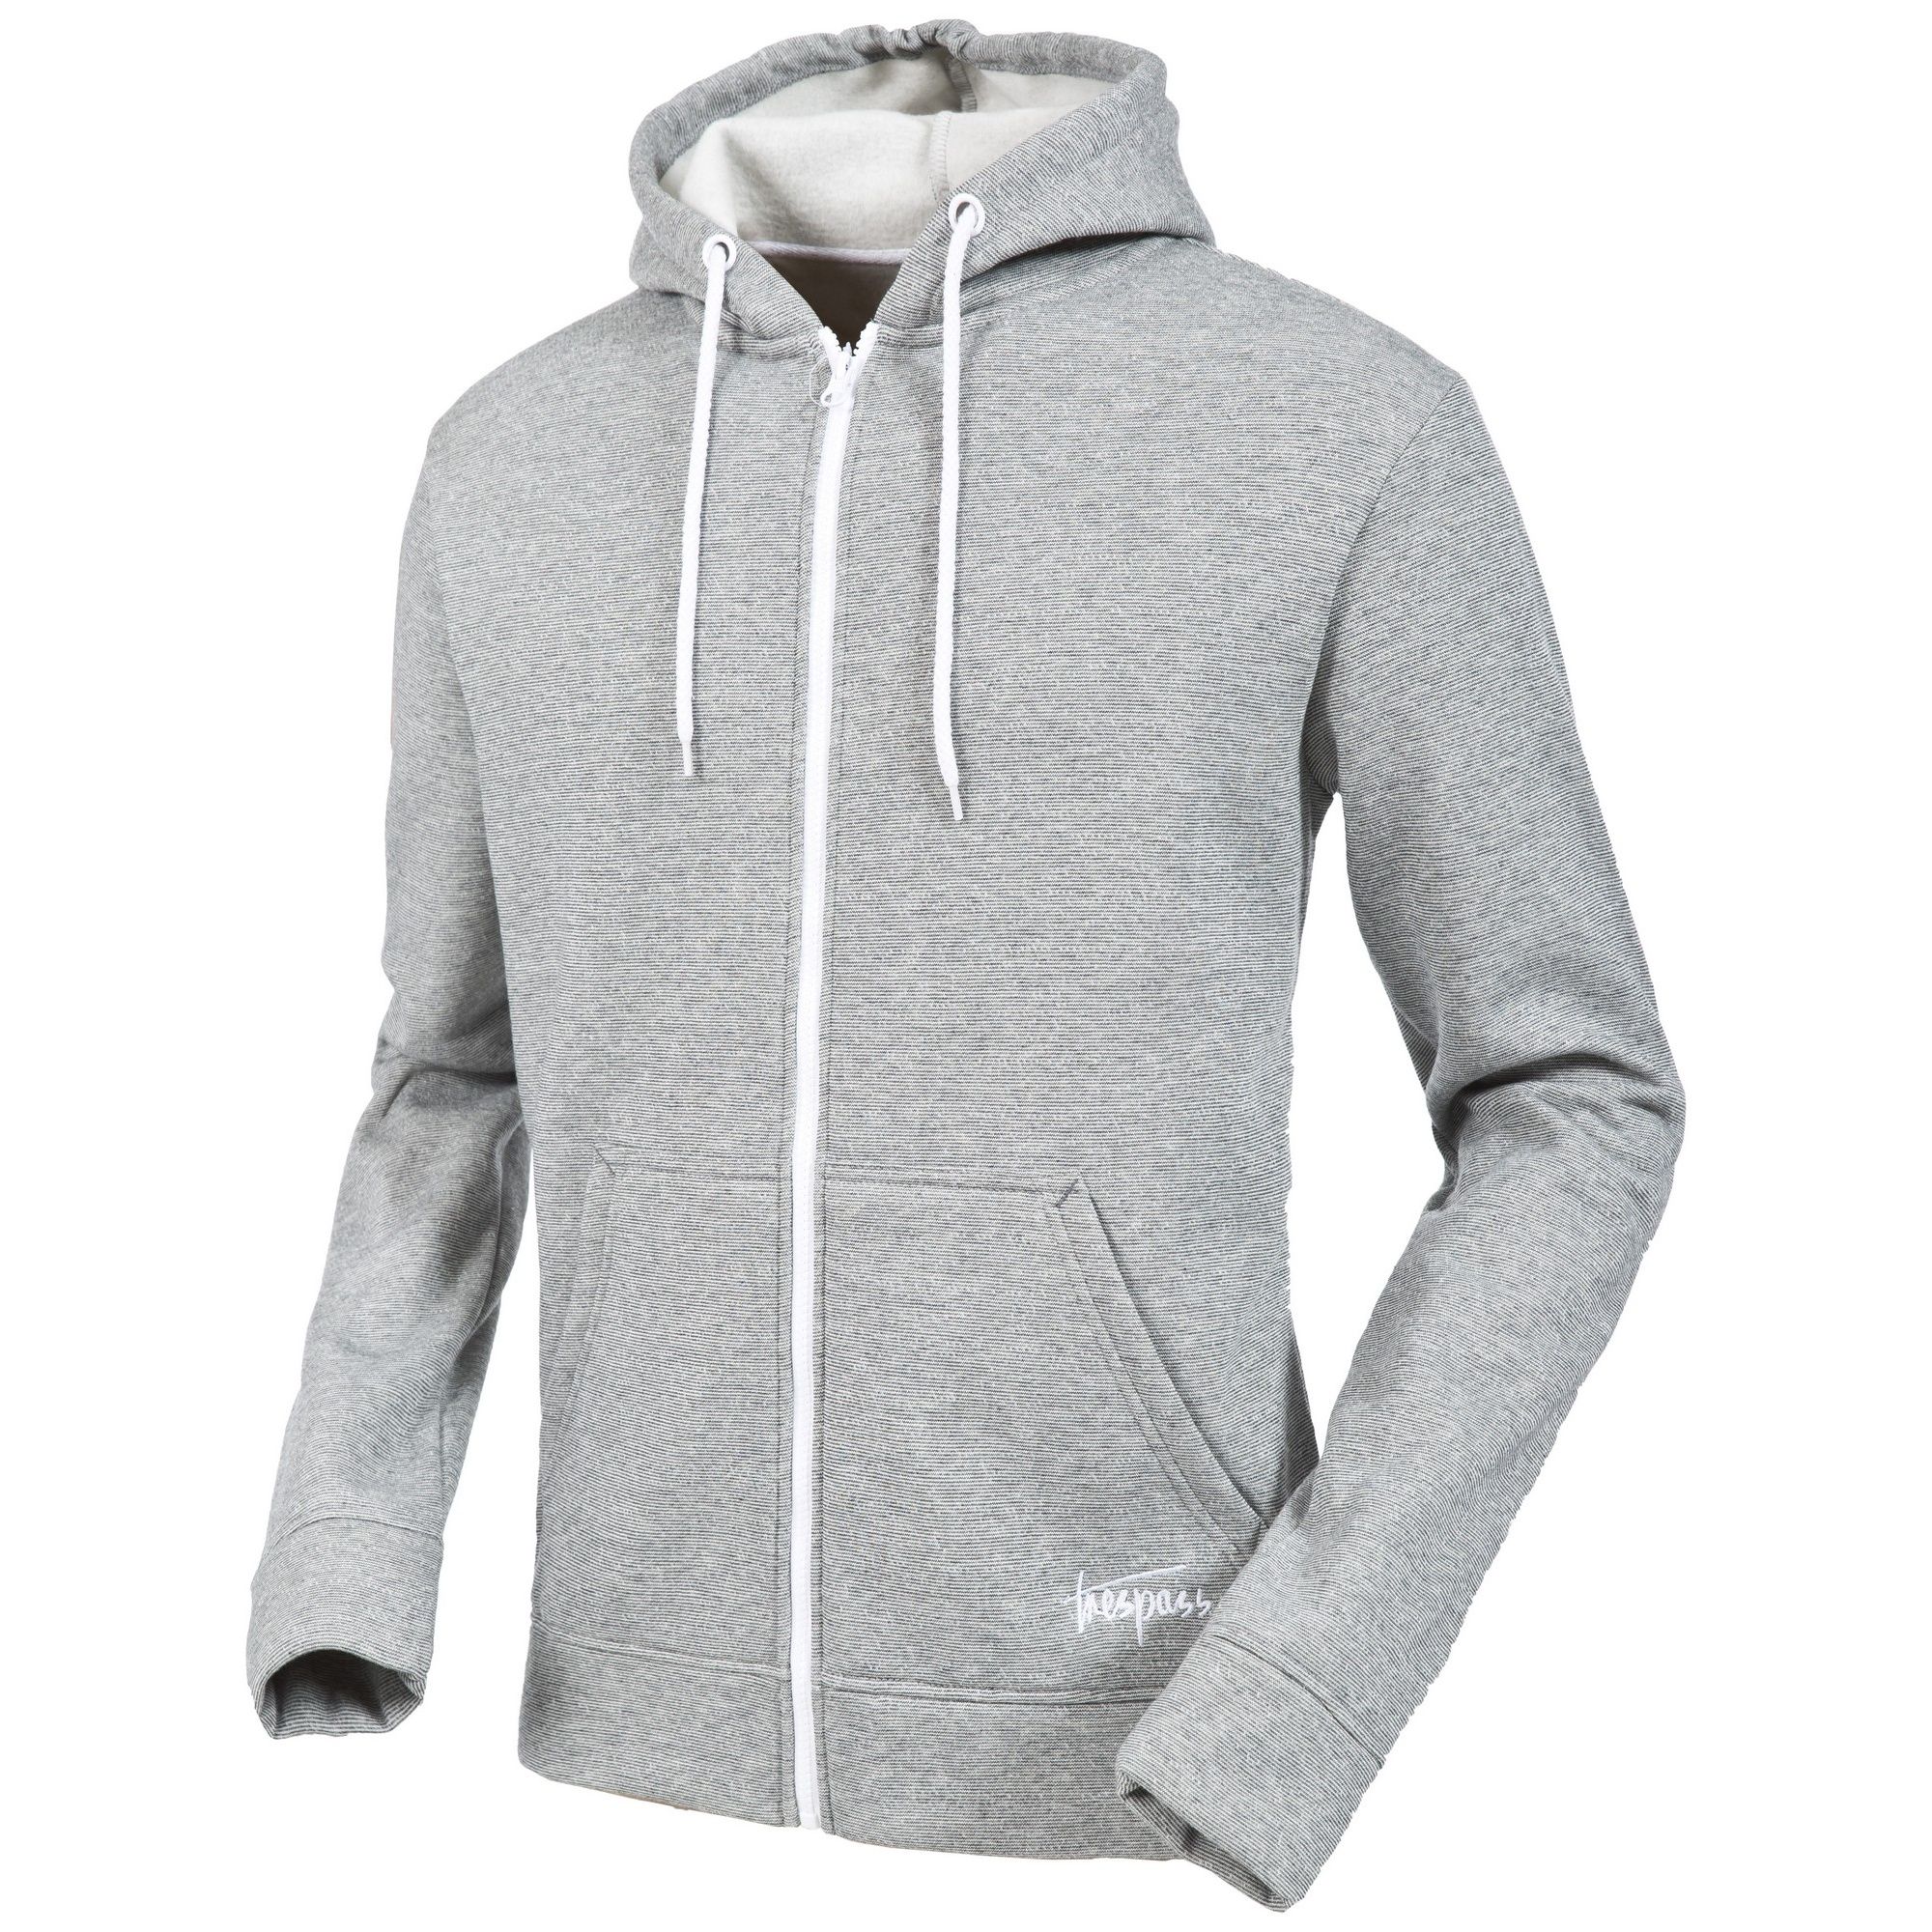 Full zip. Adjustable grown on hood. Front pouch pockets. Embroidered logo. 65% Polyester, 35% Cotton. Trespass Mens Chest Sizing (approx): S - 35-37in/89-94cm, M - 38-40in/96.5-101.5cm, L - 41-43in/104-109cm, XL - 44-46in/111.5-117cm, XXL - 46-48in/117-122cm, 3XL - 48-50in/122-127cm.